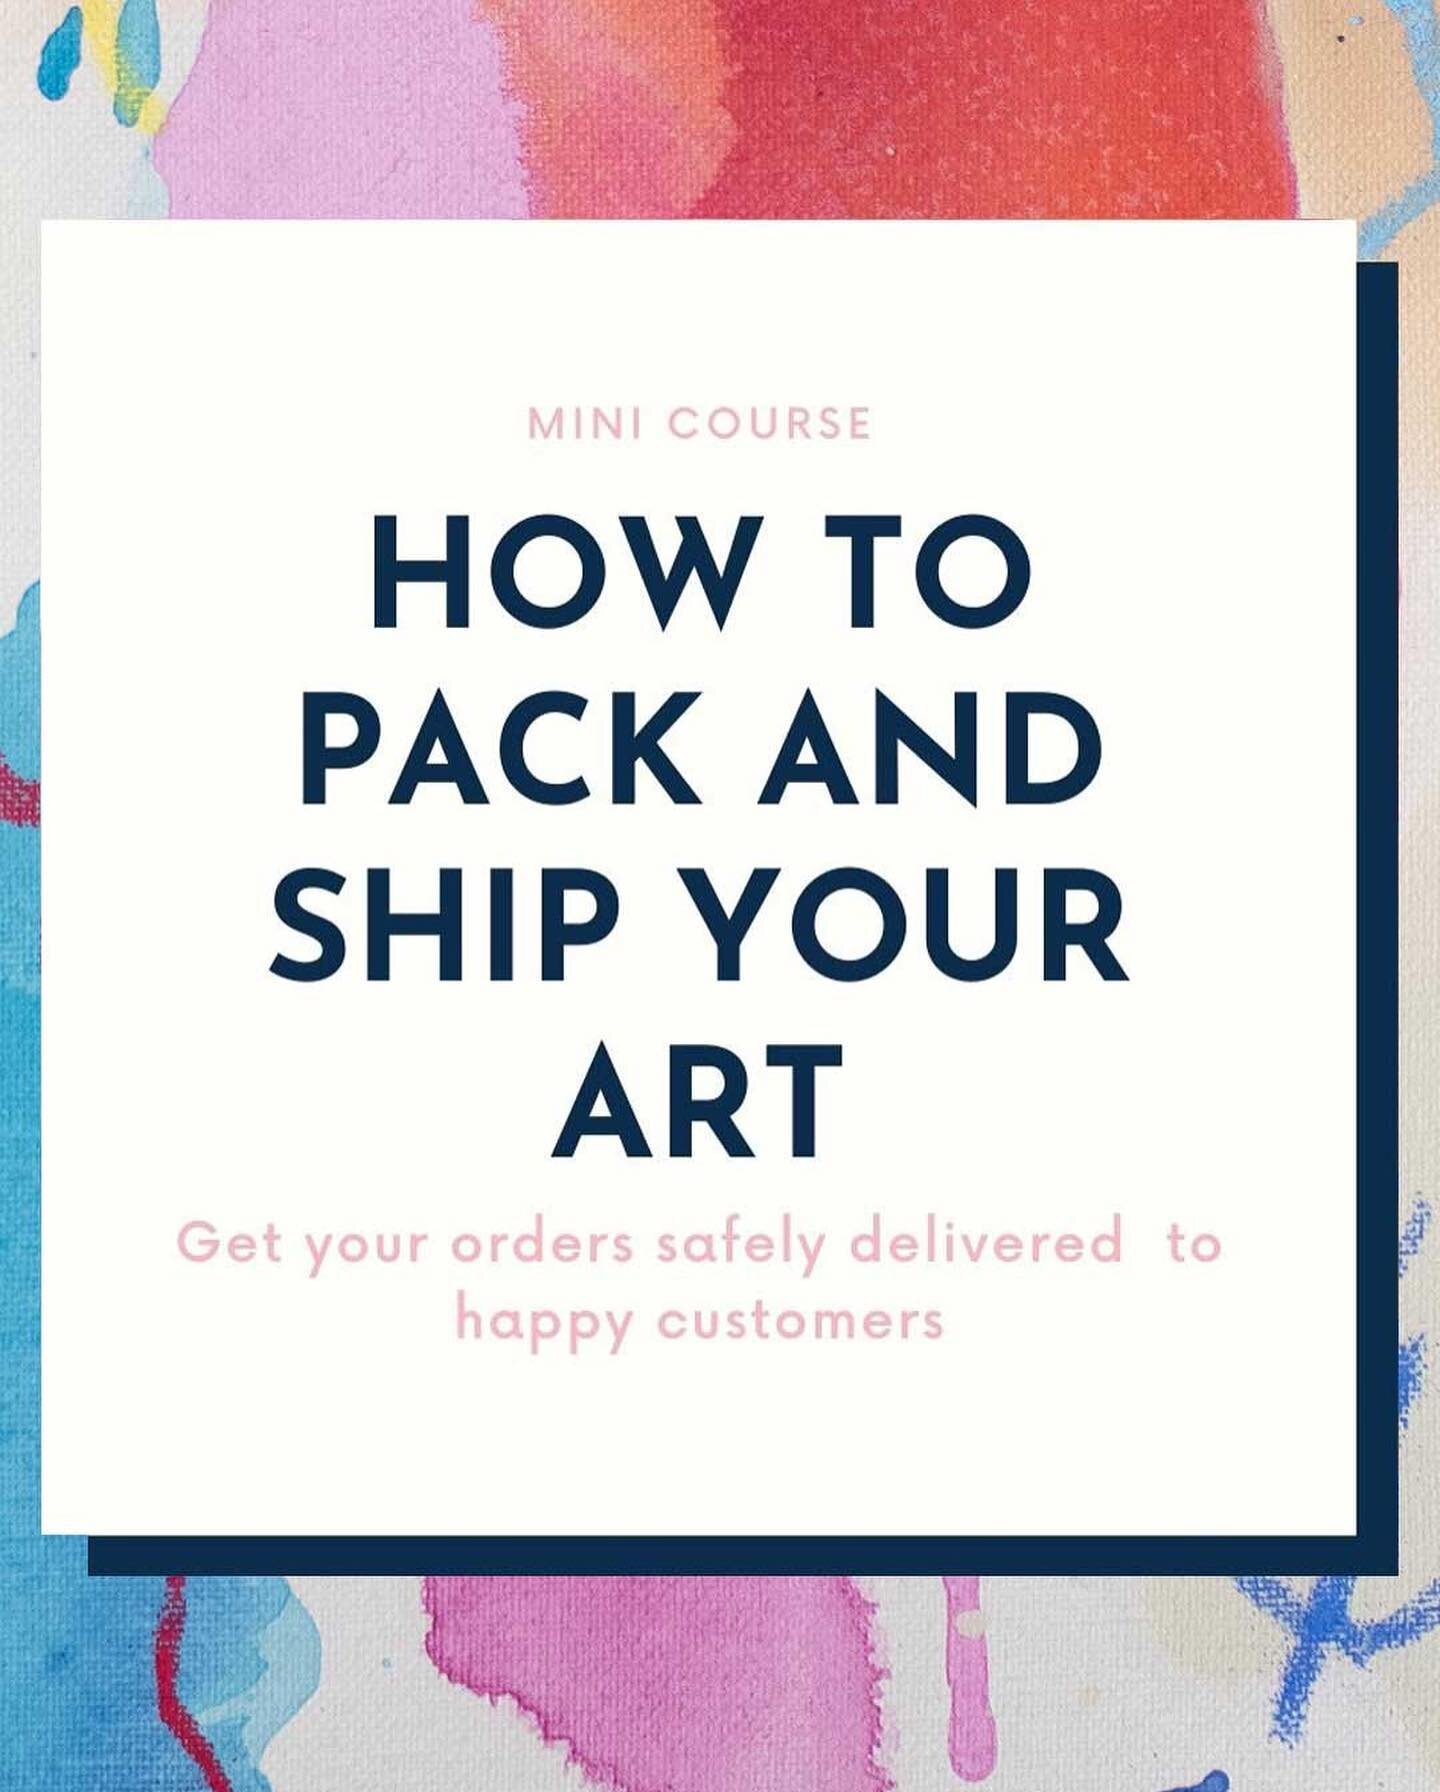 IT IS LIVE!
My mini-course HOW TO PACK AND SHIP YOUR ART is ready for all beginning artists out there getting ready for the Holiday season.
If you're lost- I got you covered. With my short, straight-to-the-point video instructions, you will navigate 